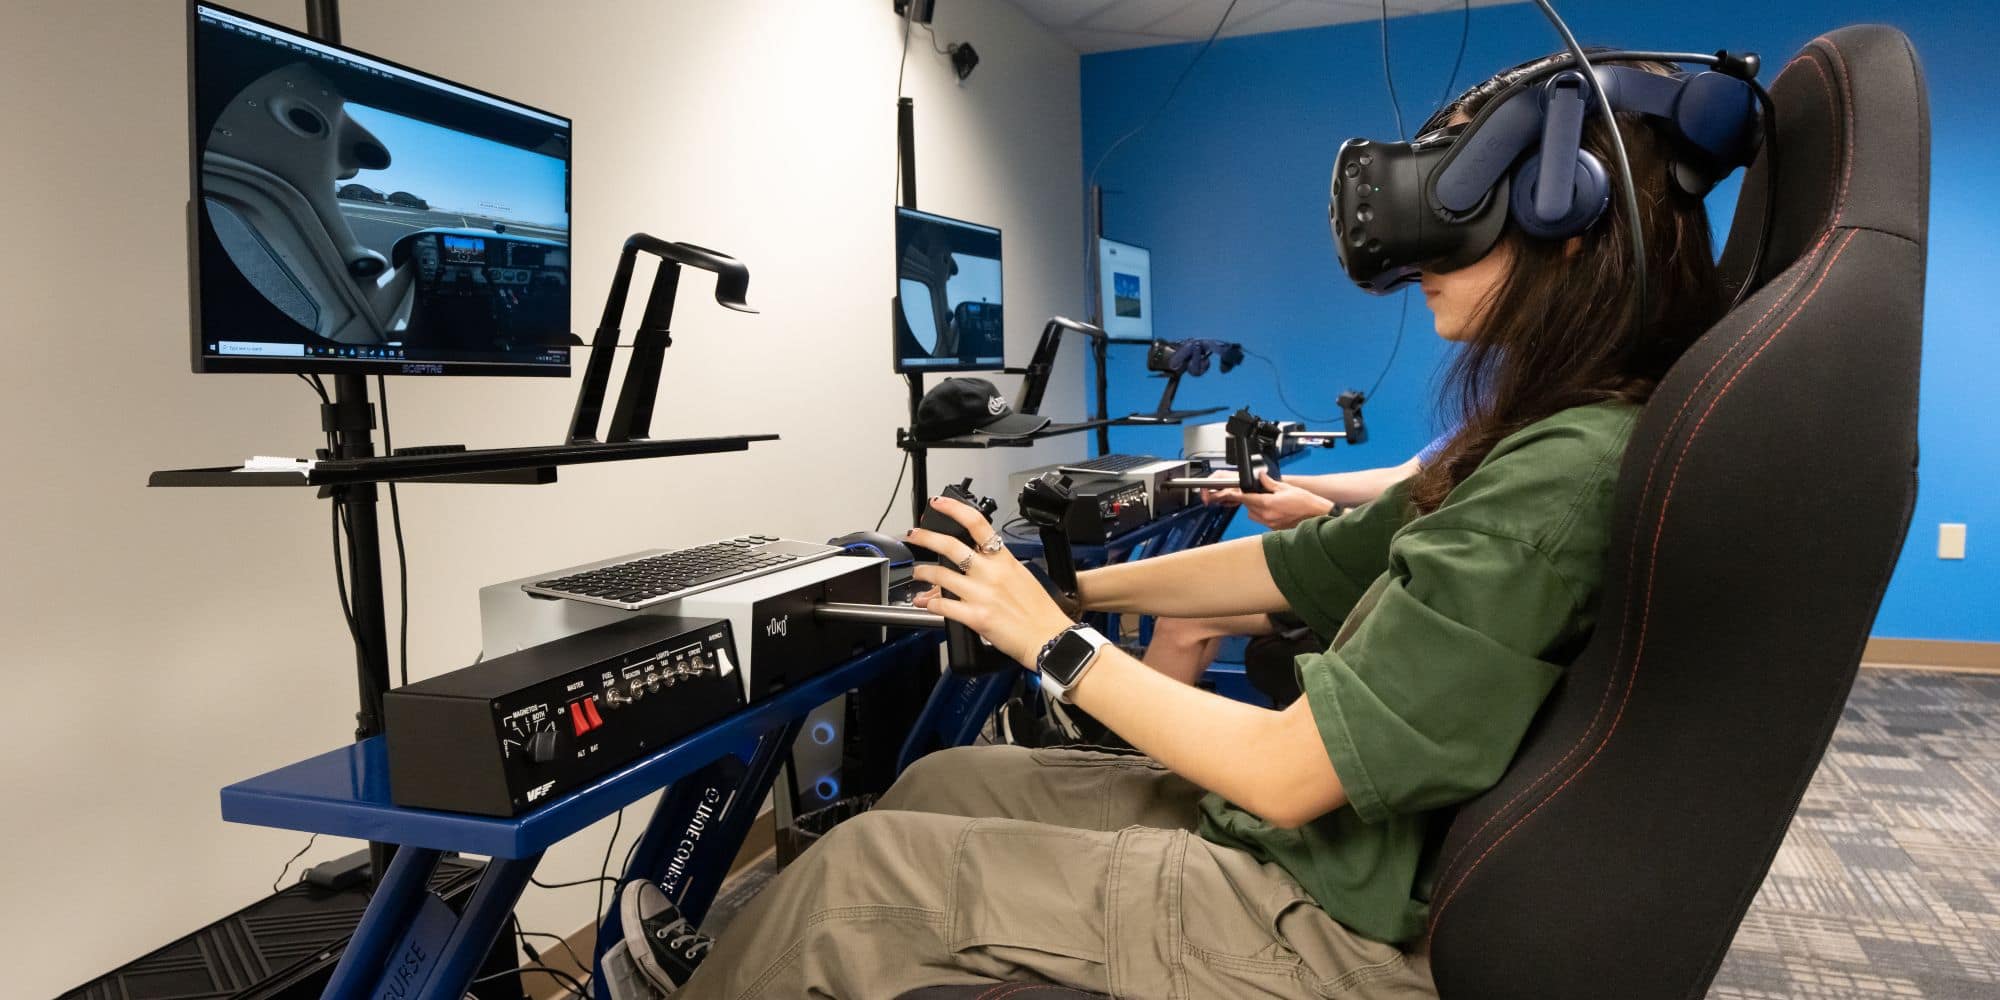 Embry-Riddle student Laurayna Pick, a freshman Aeronautical Science major, conducts virtual-reality flight training maneuvers at the Advanced Flight Simulation Center. (Photo: Embry-Riddle / Bernard Wilchusky)